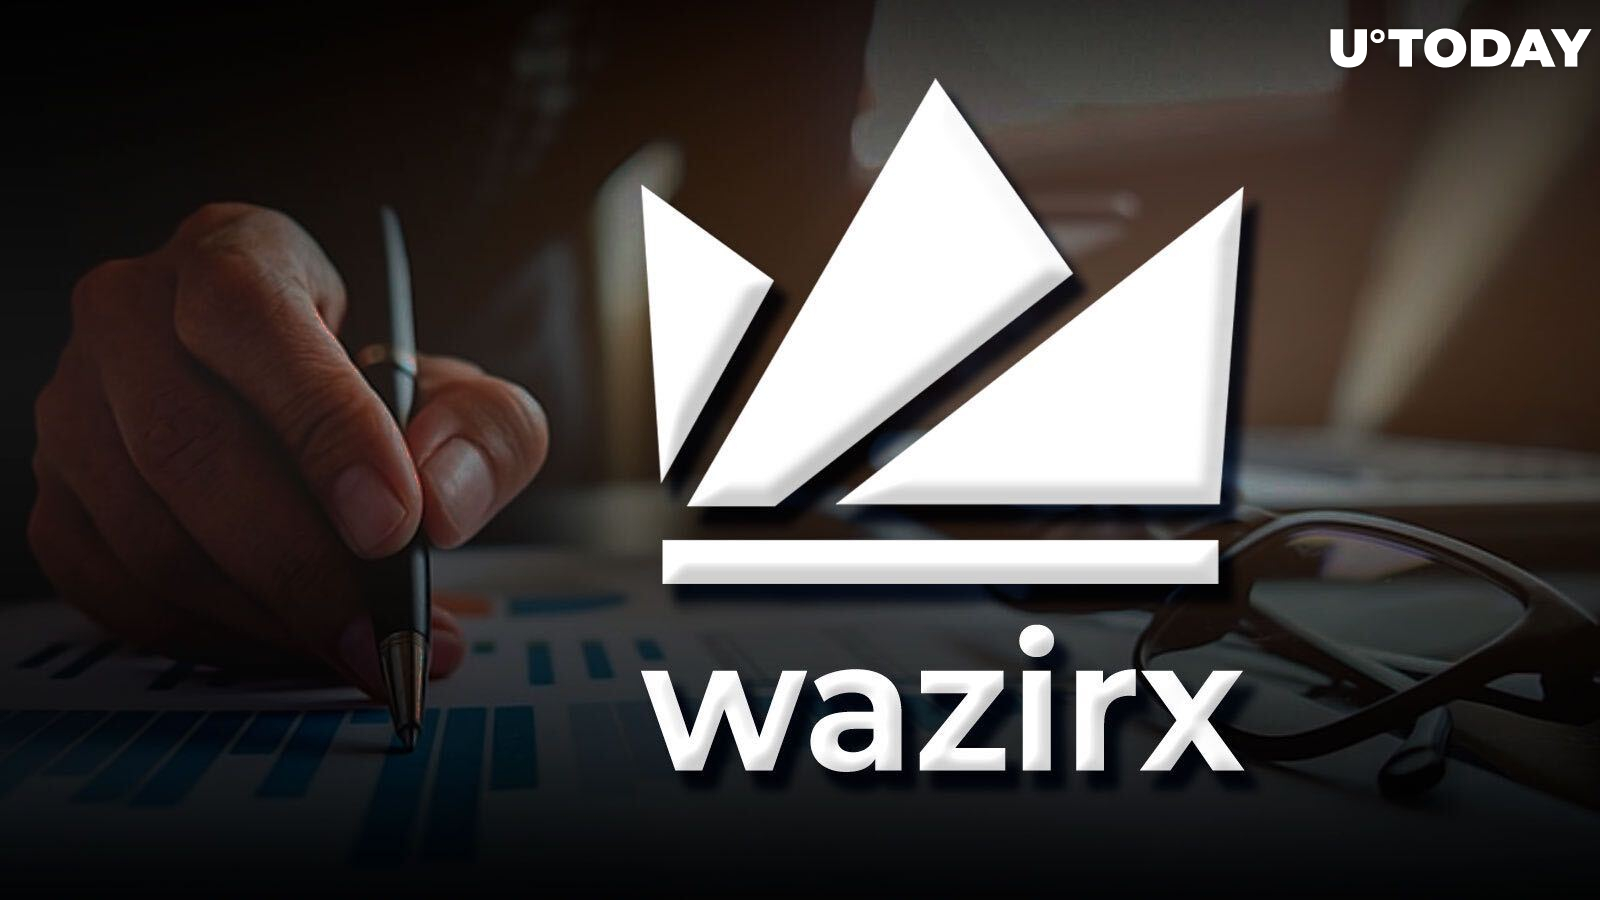 WazirX Comes Under Investigation as $350 Million Laundered Through Largest Indian Exchange